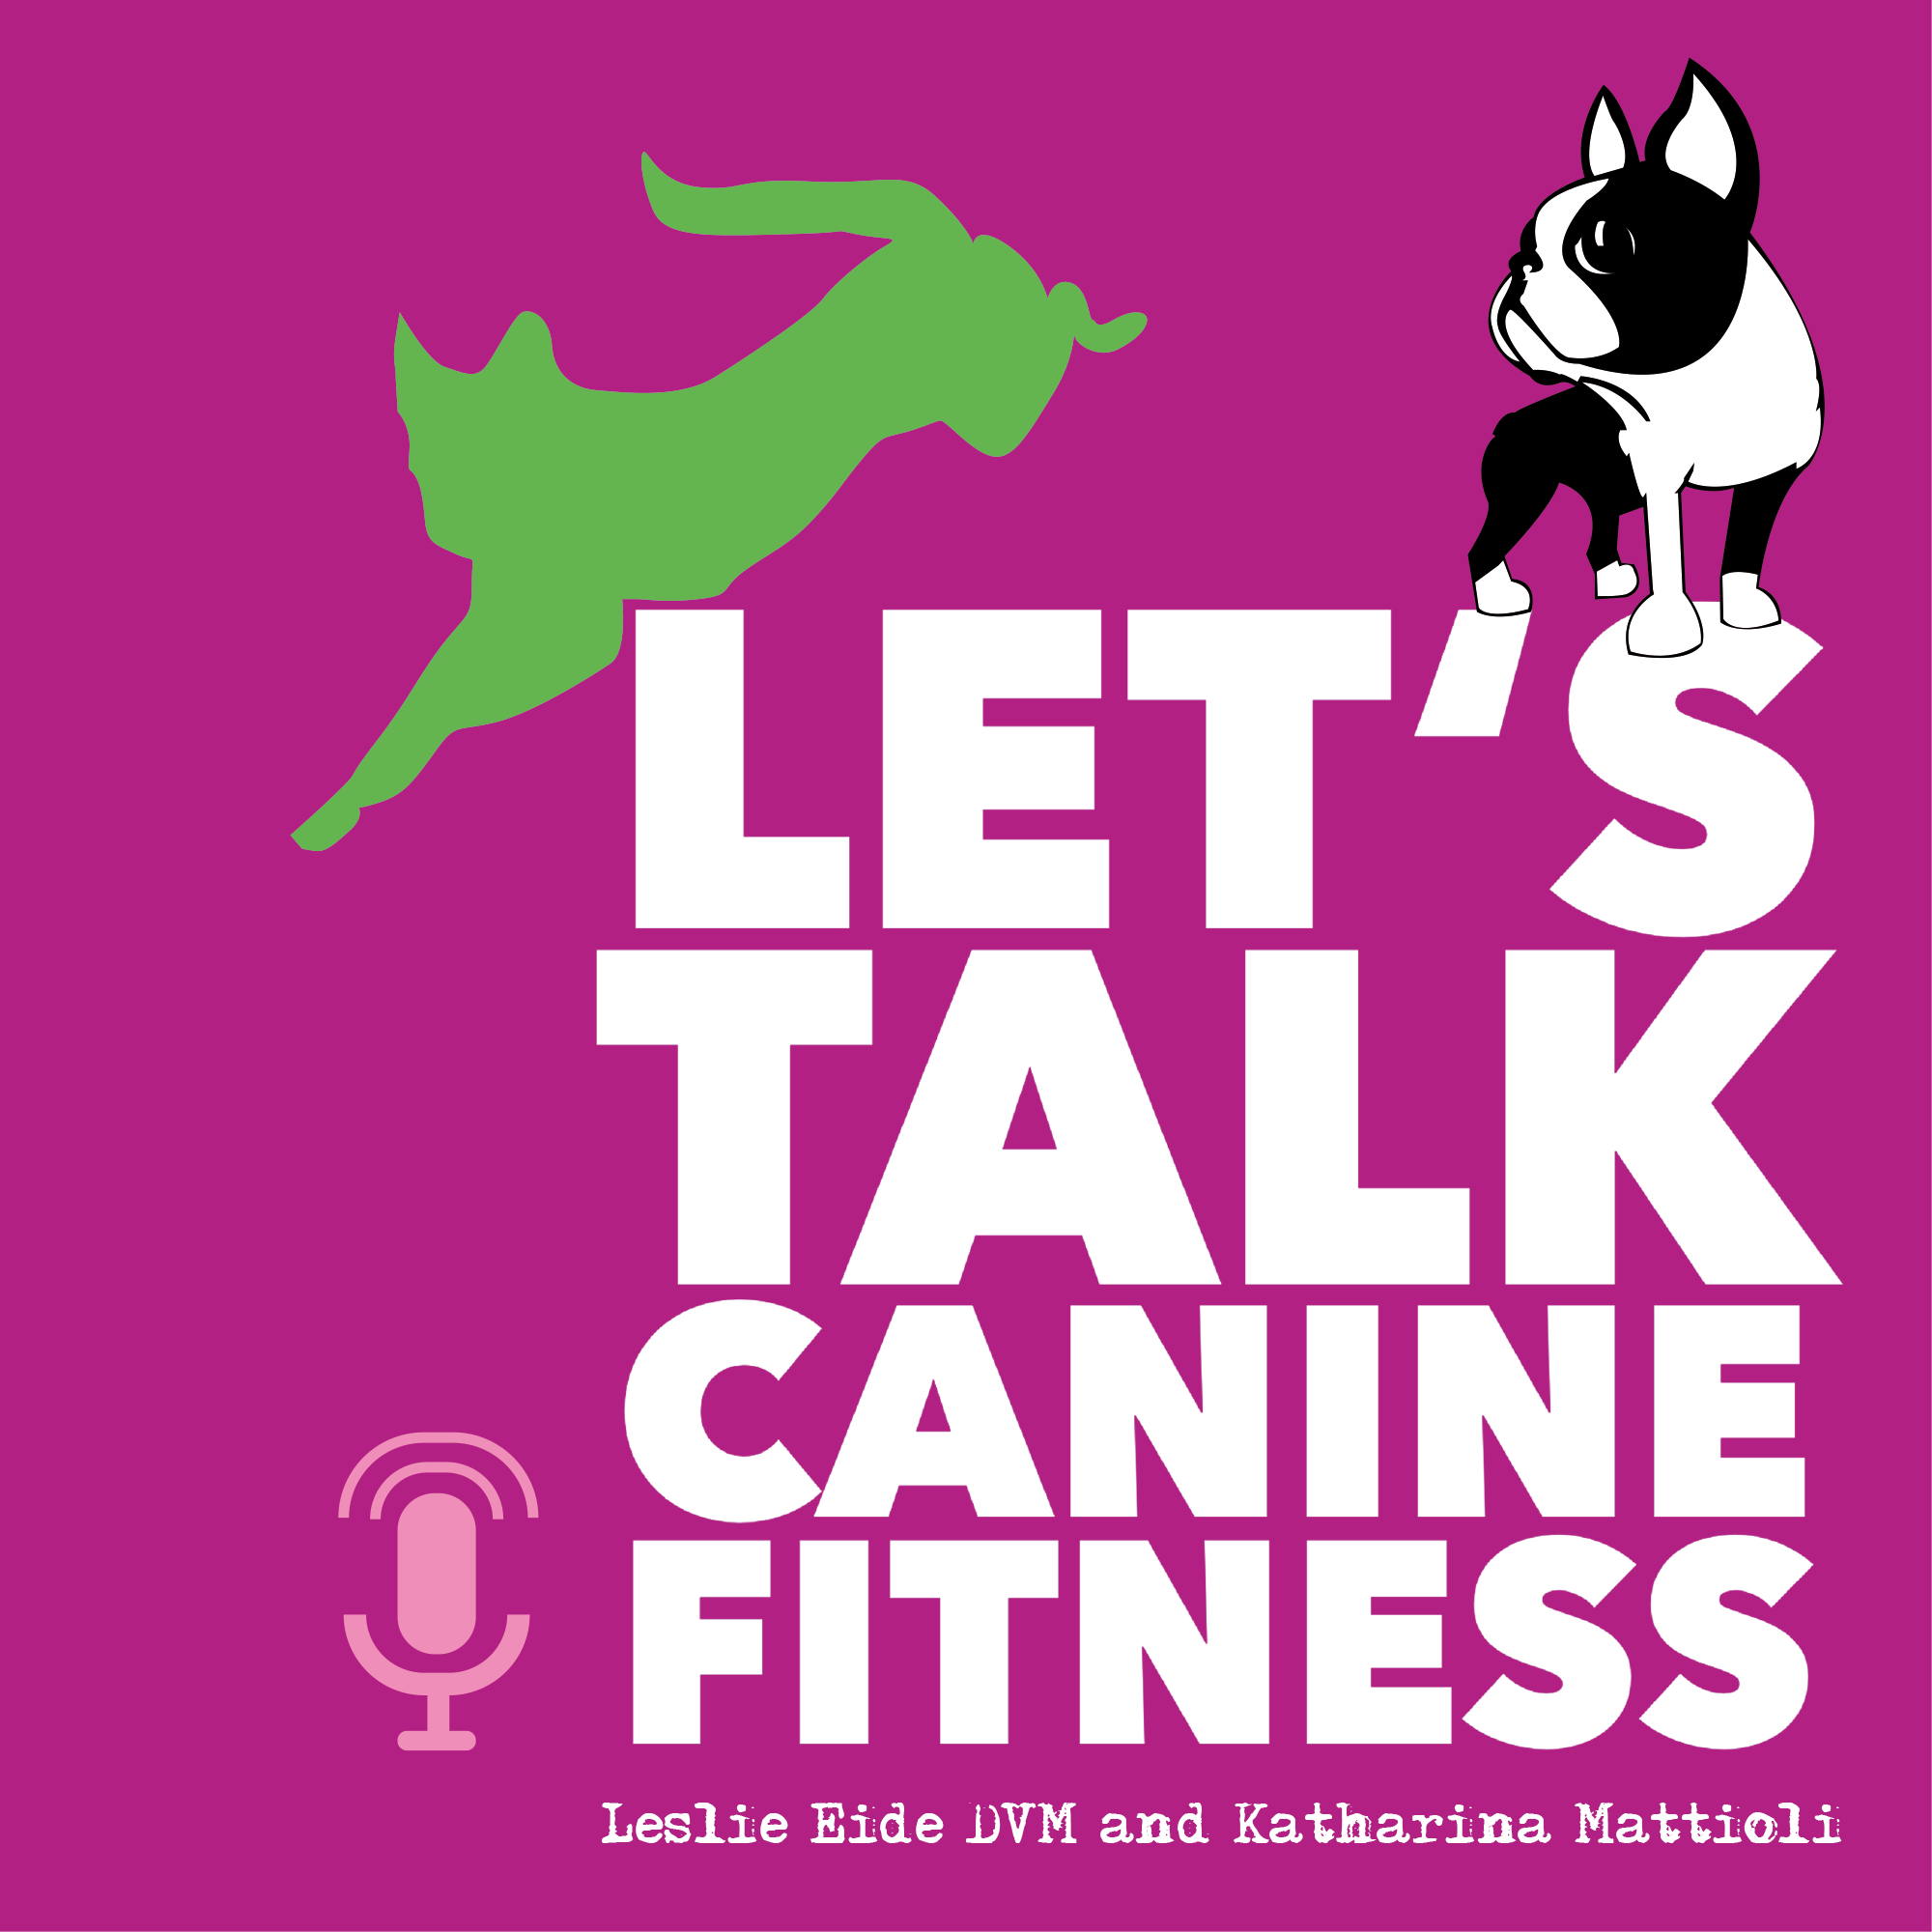 Coming Soon! Let’s Talk Canine Fitness